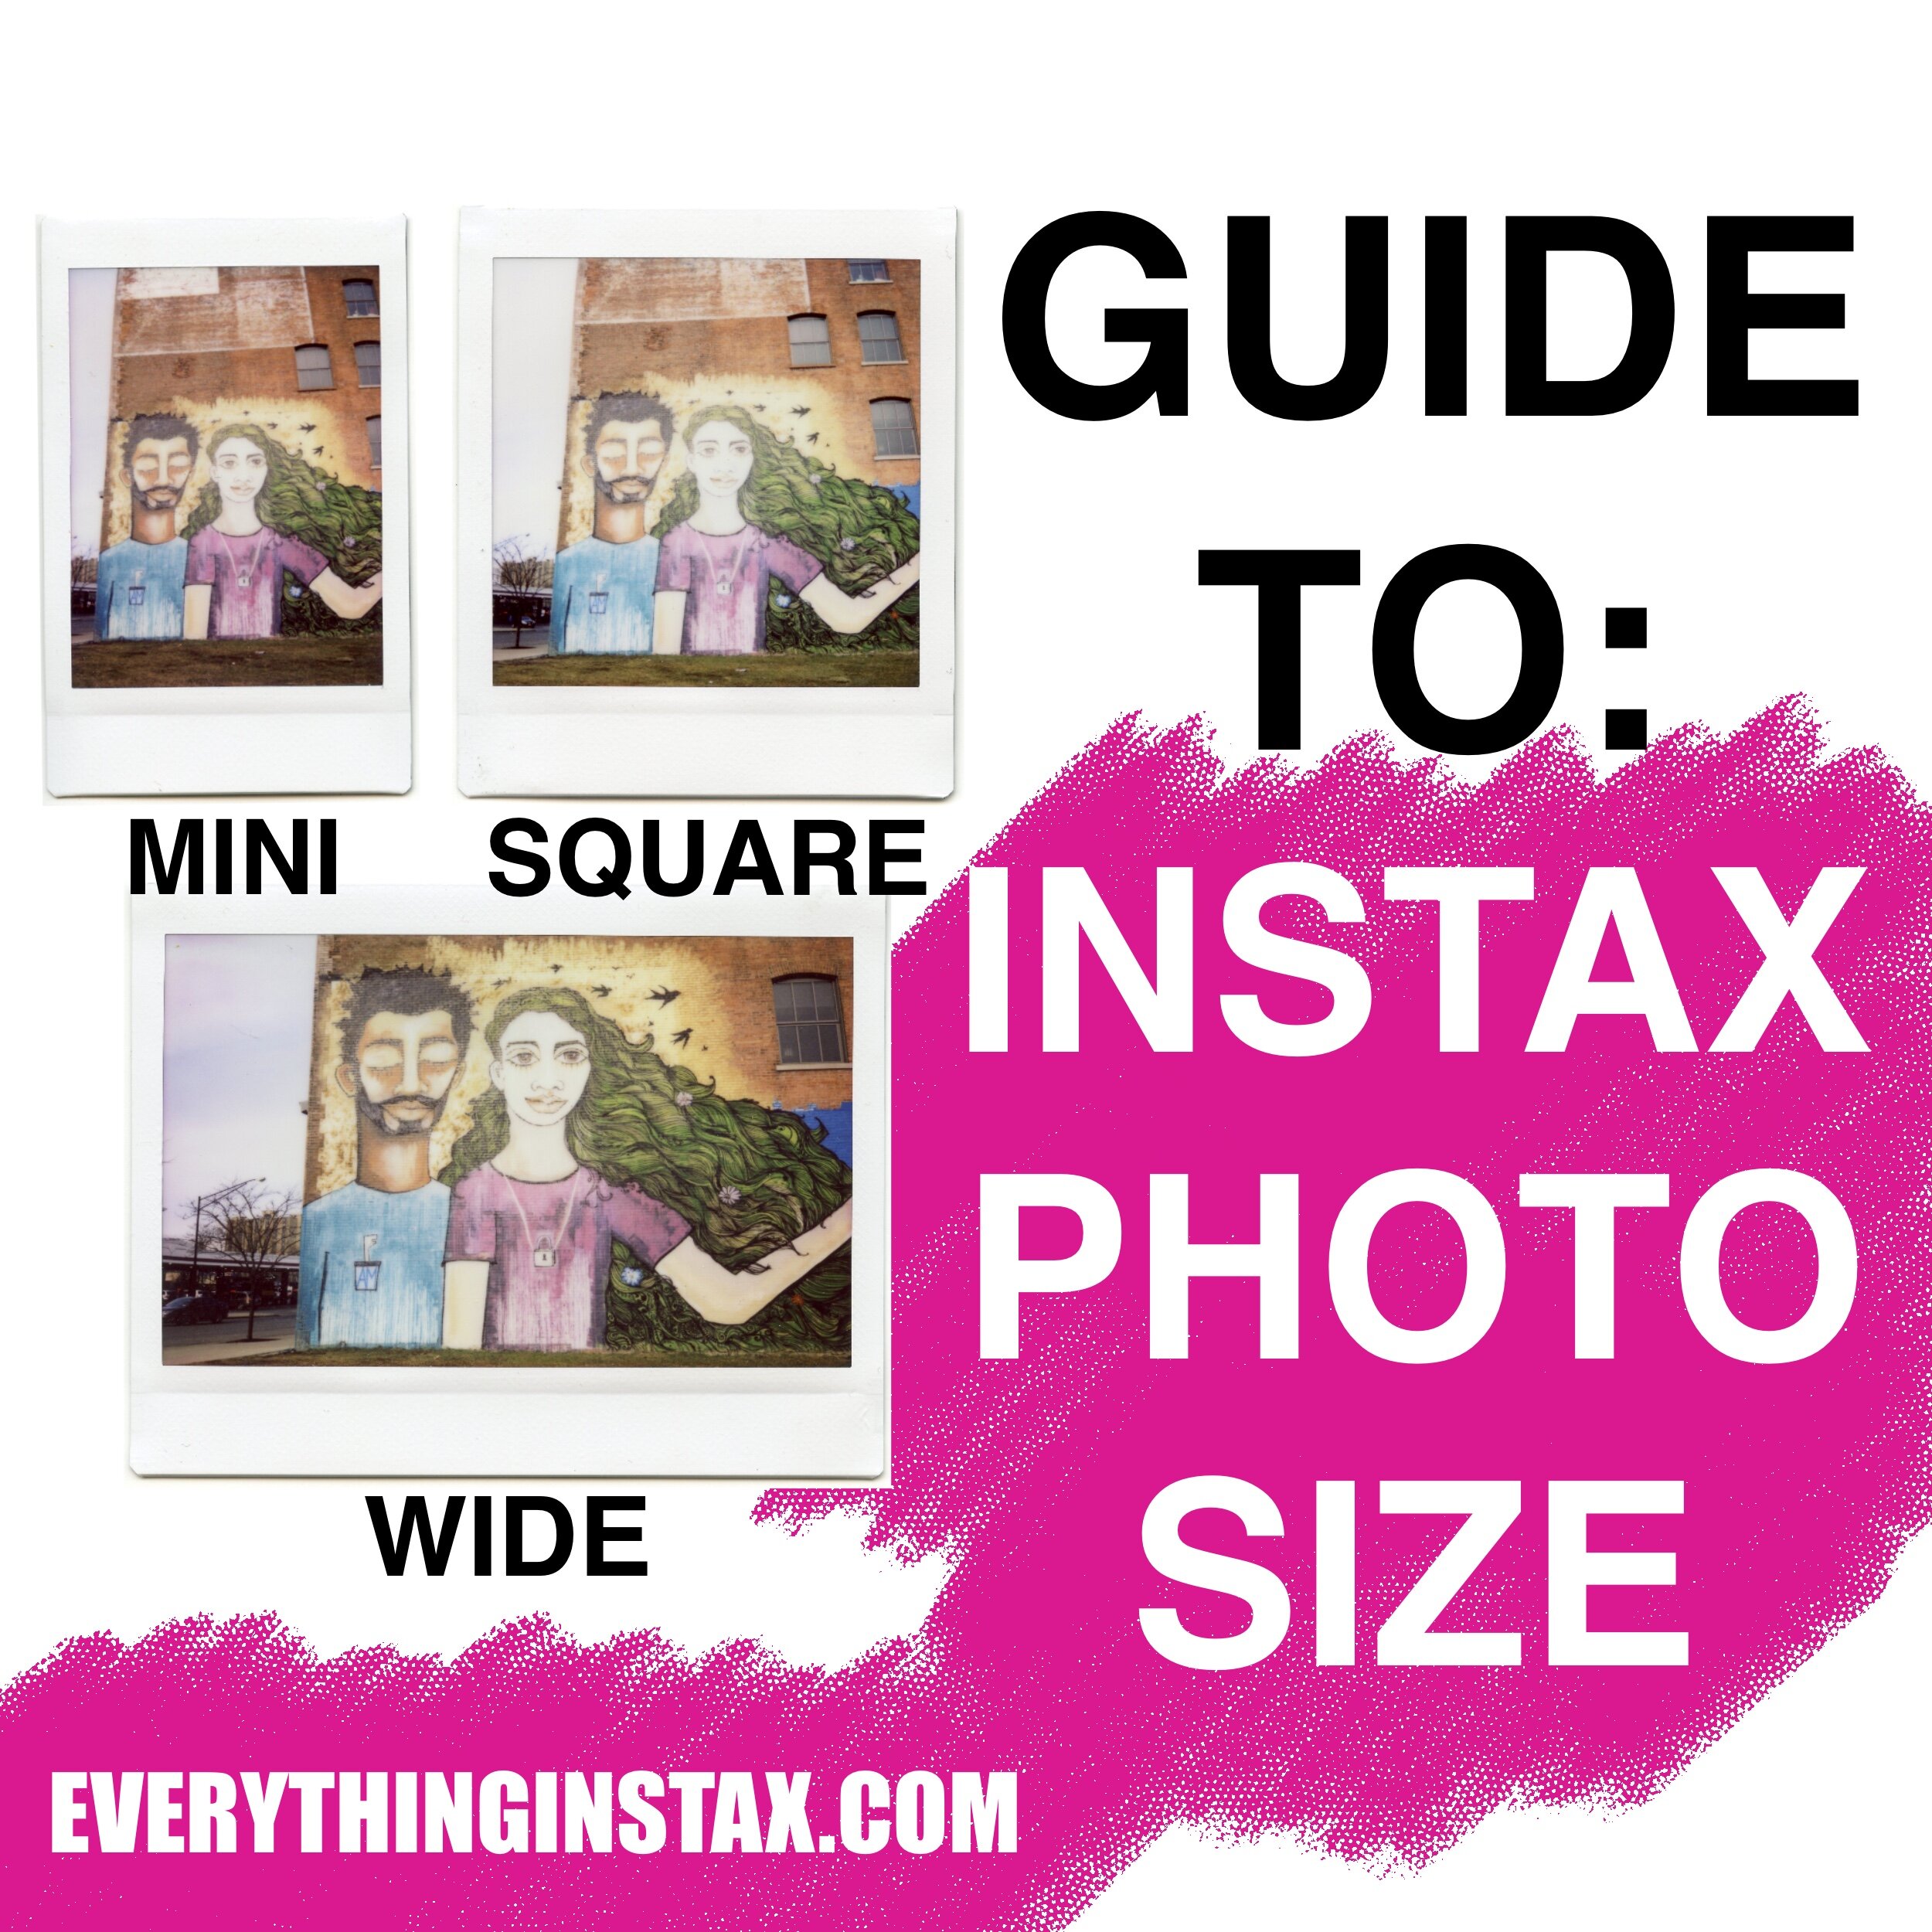 marked mover trofast Fujifilm Instax Photo Size (Mini vs. Square vs. Wide) — EVERYTHING INSTAX -  Instax Camera Reviews & More